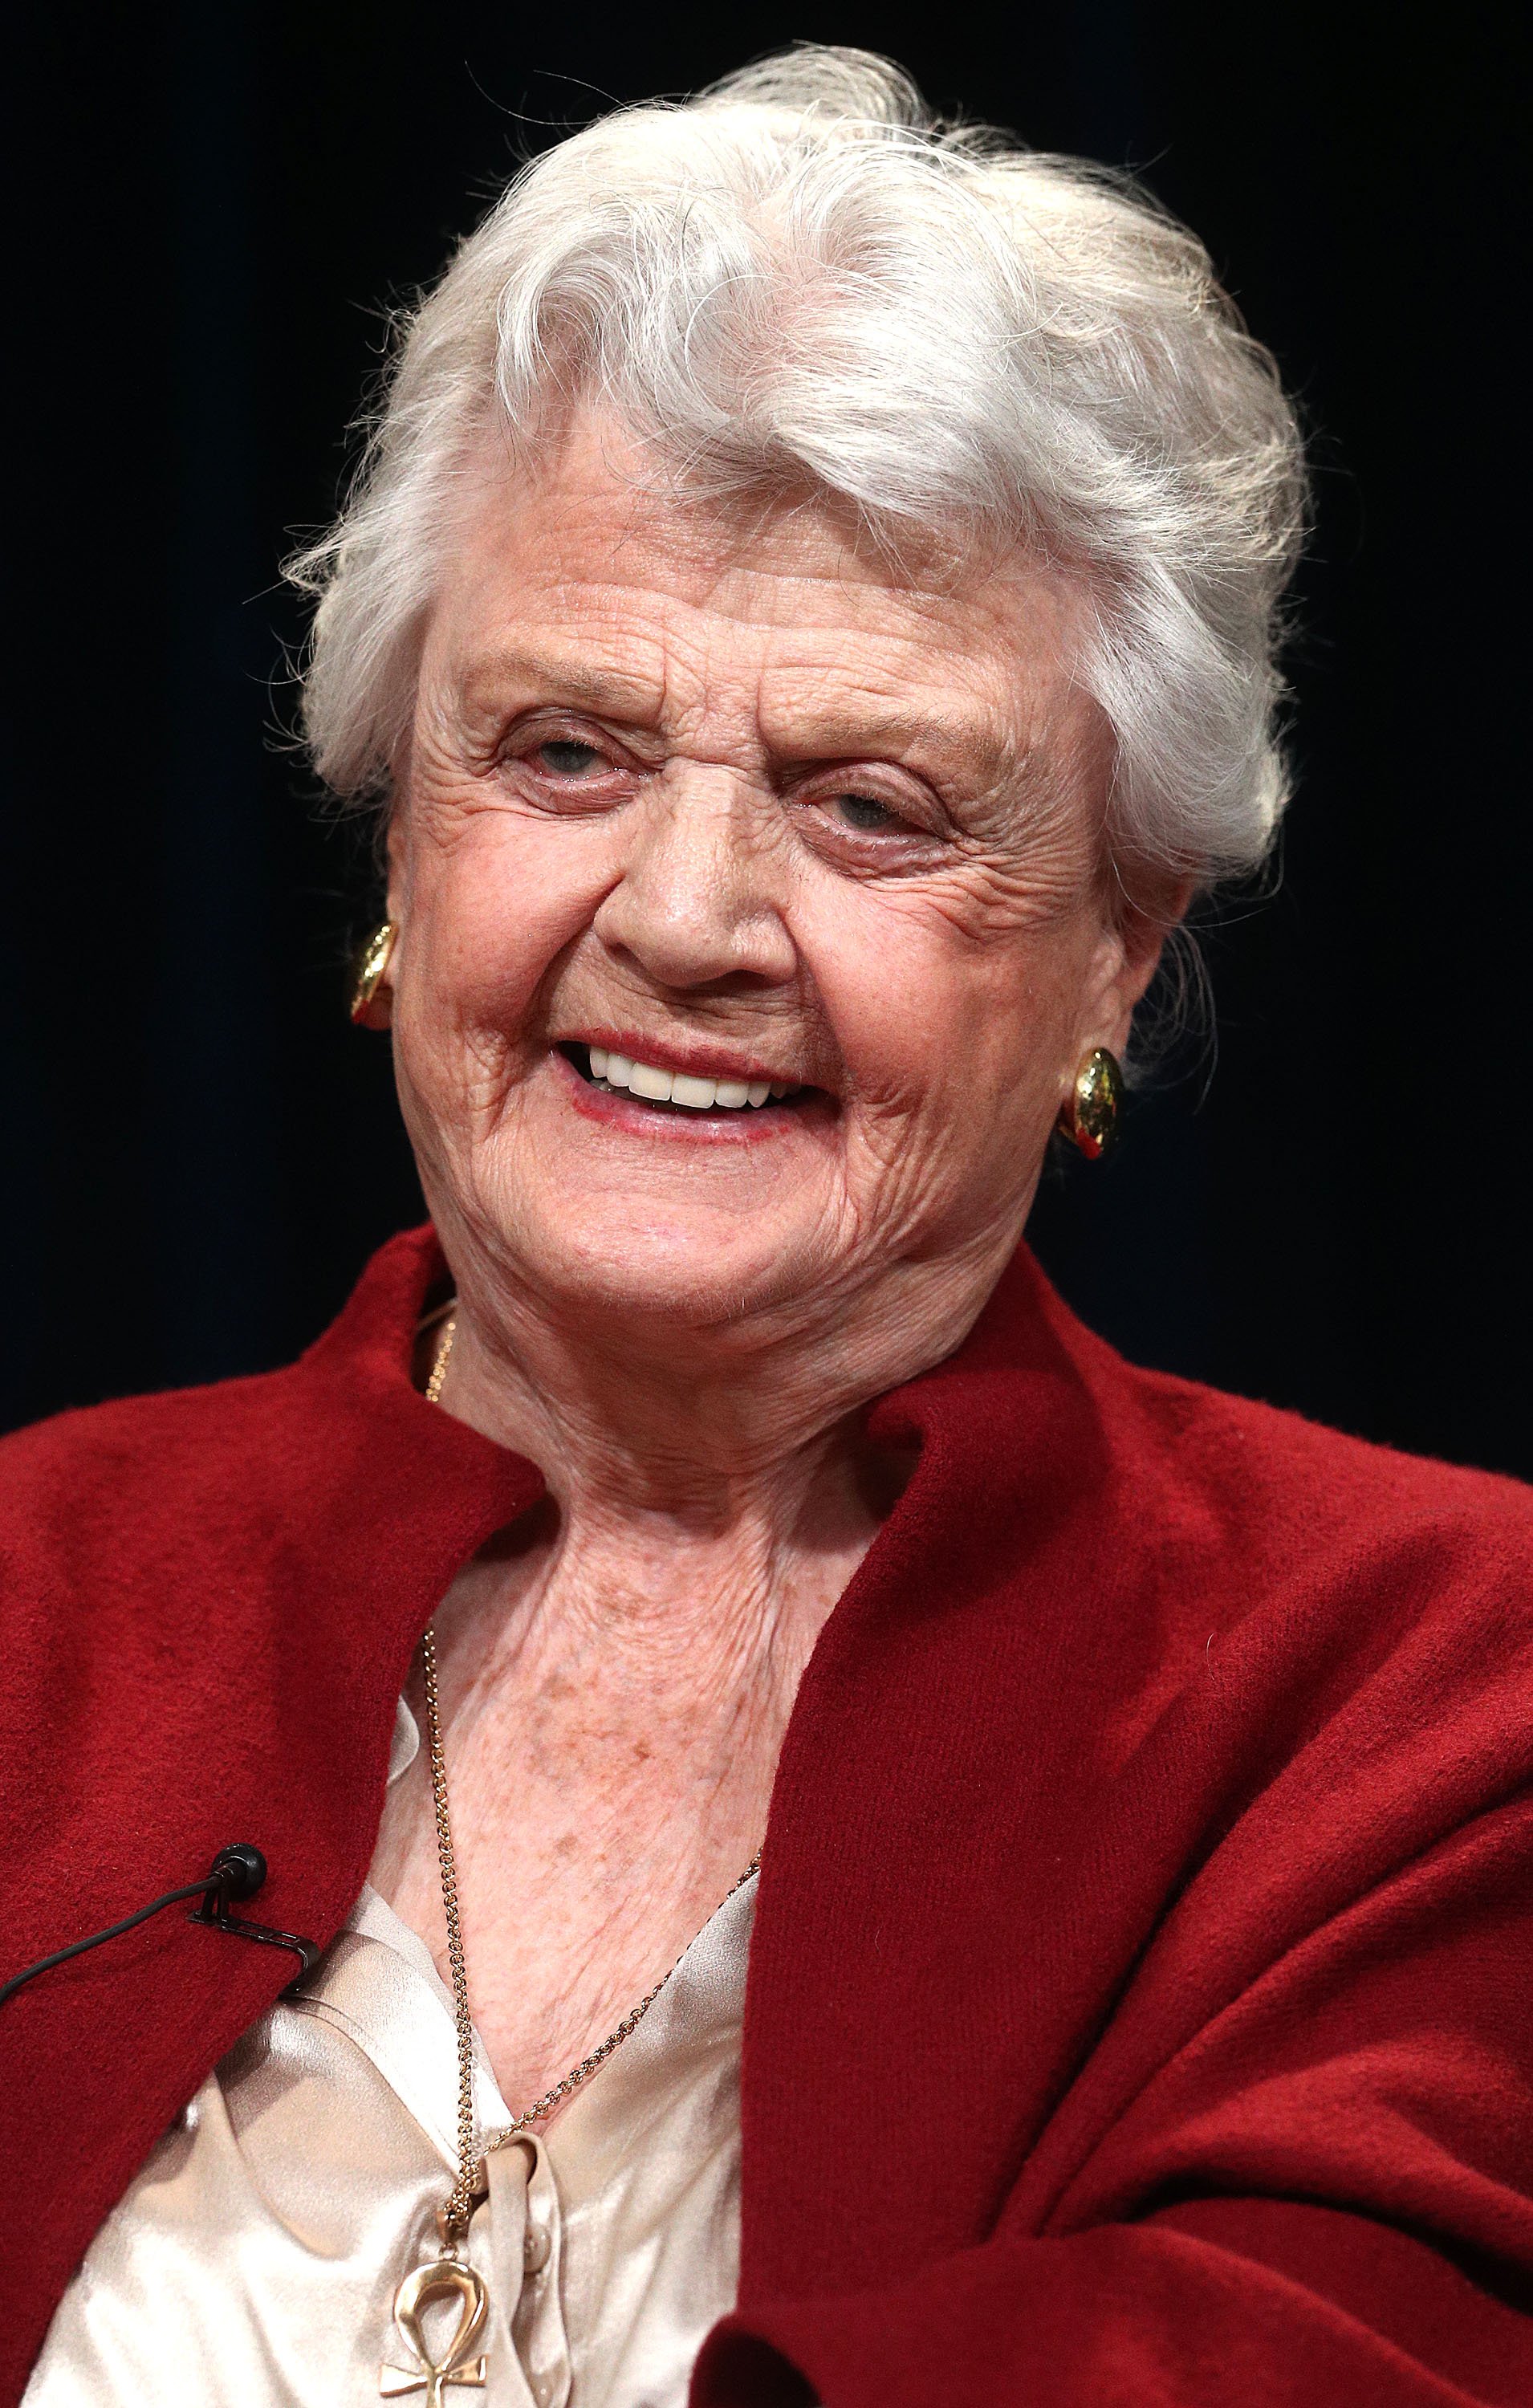 Angela Lansbury at the PBS segment of theWinter Television Critics Association Press Touron January 16, 2018, in Pasadena, California | Source: Getty Images